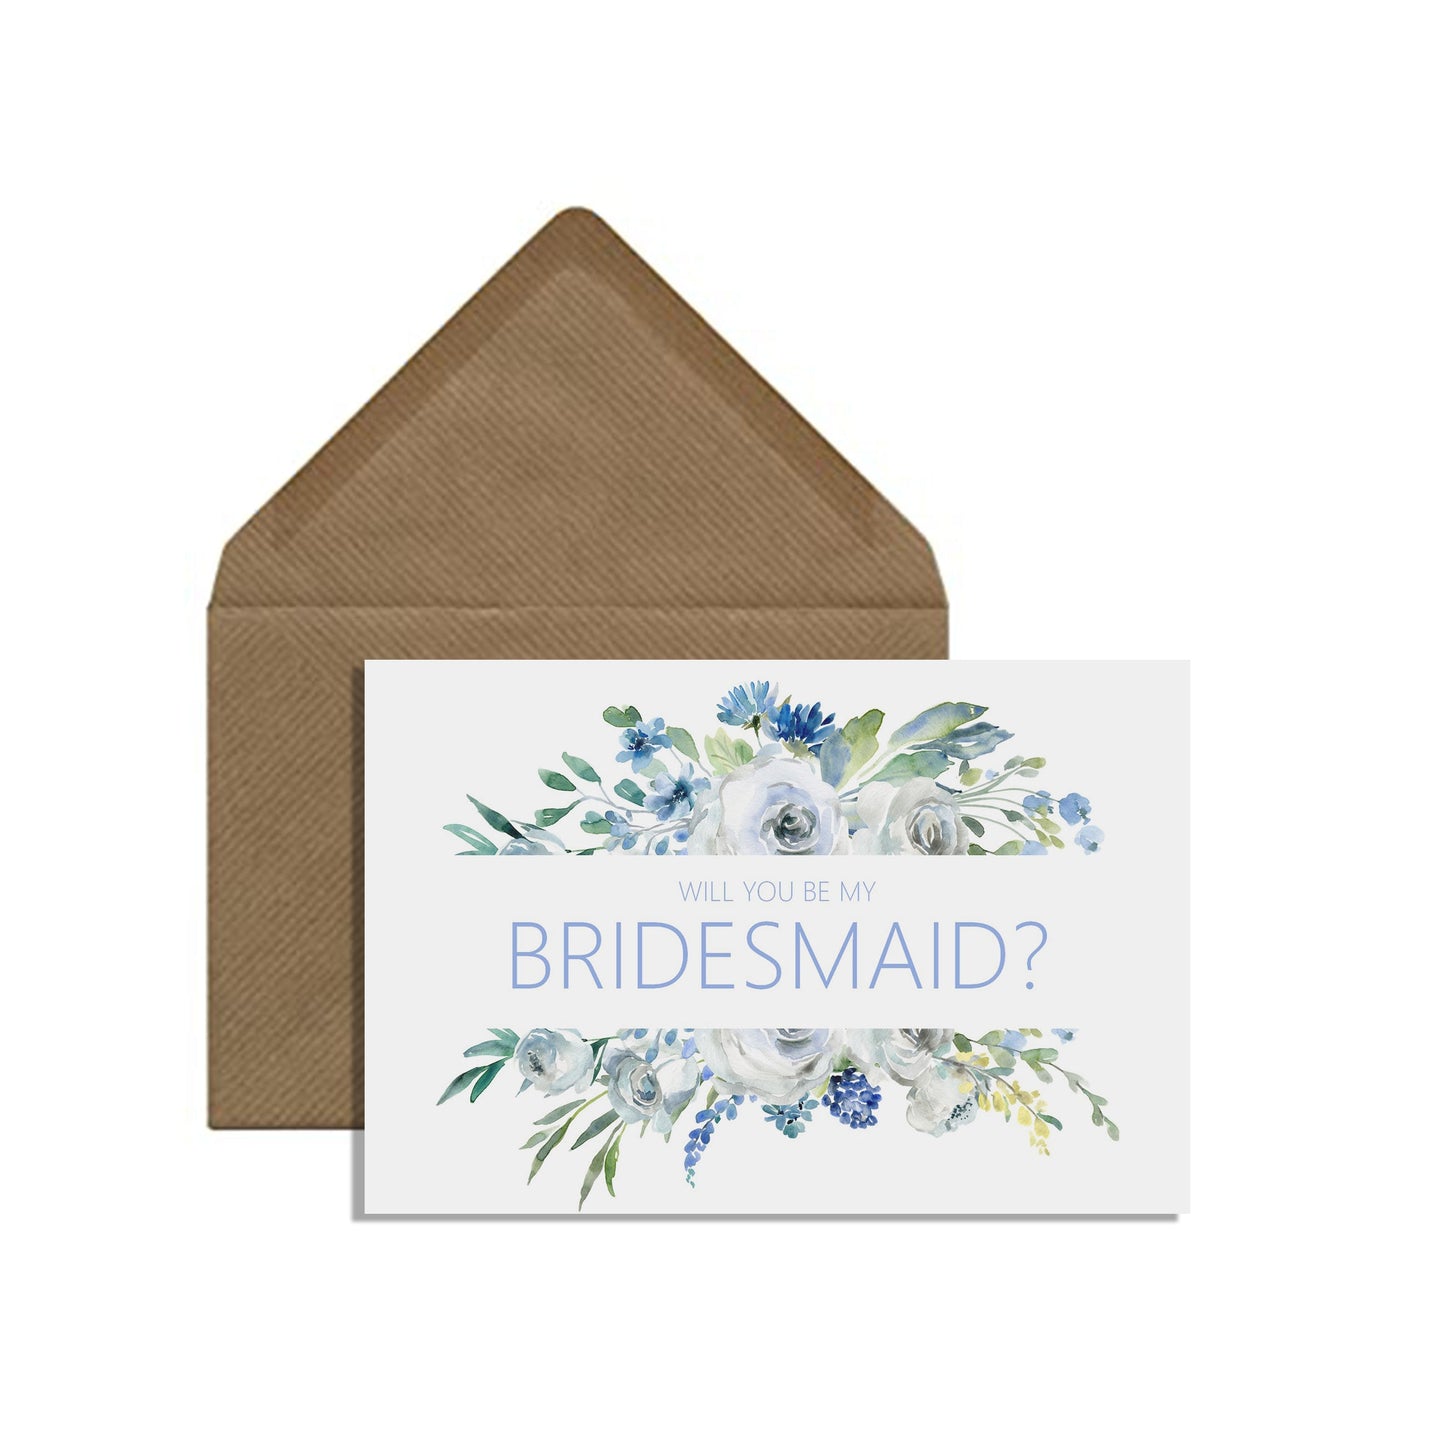 Will You Be My Bridesmaid? Wedding Proposal Card - Blue Floral